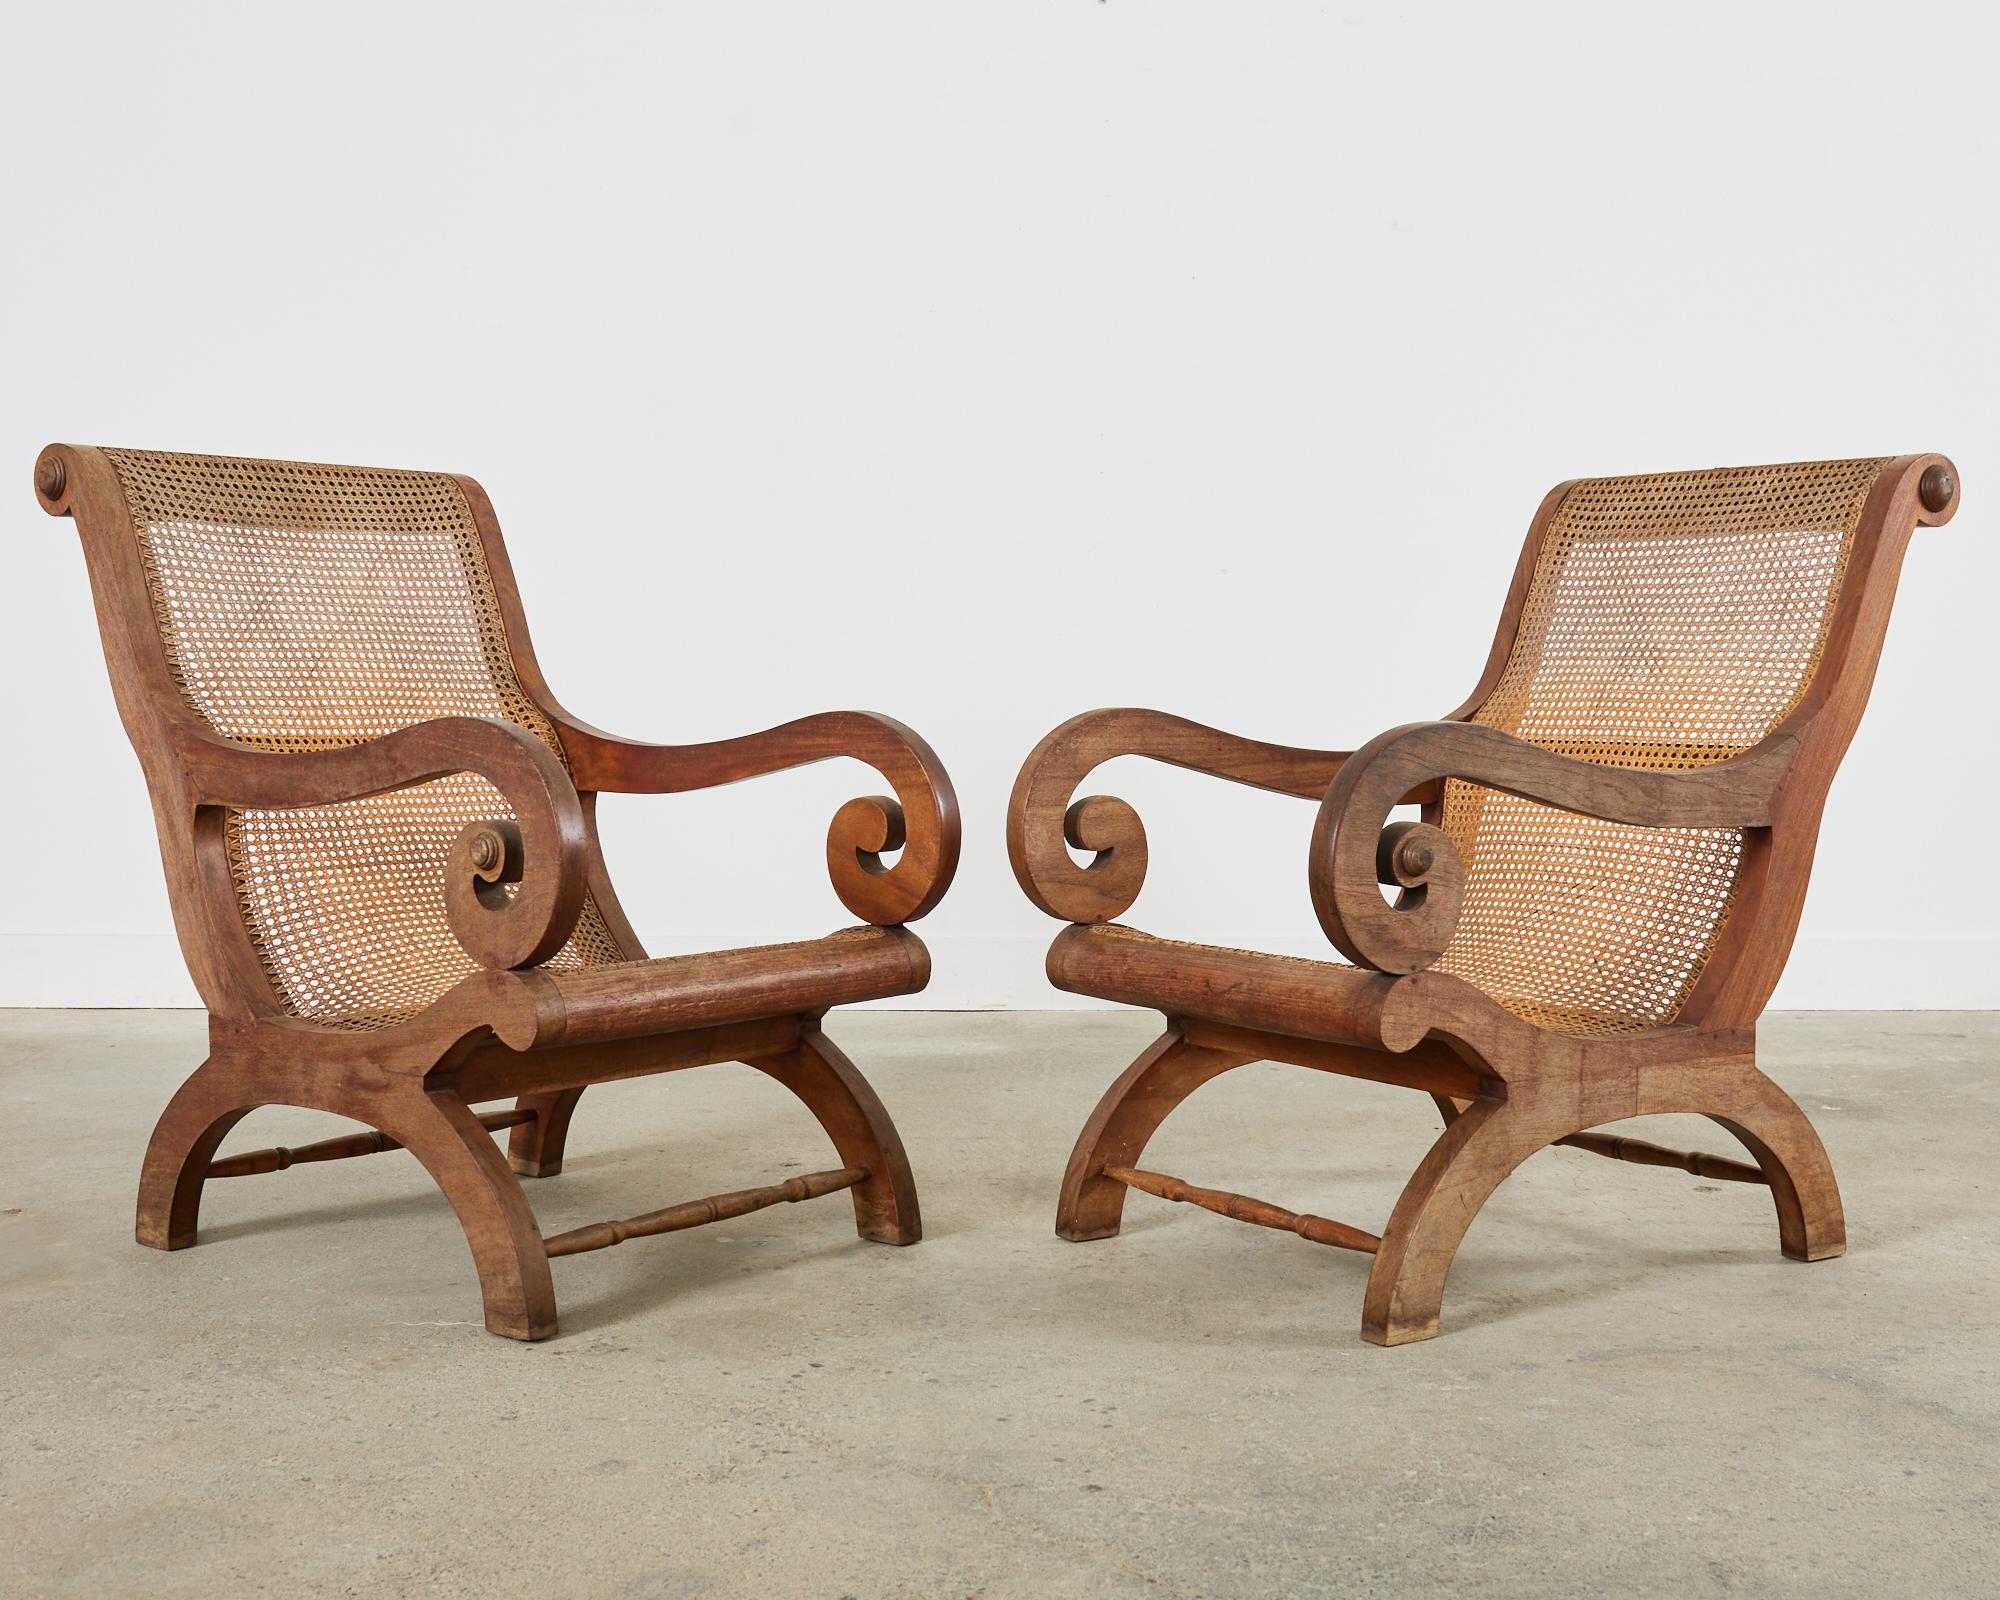 20th Century Pair of British Colonial Style Plantation Lounge Chairs with Ottomans For Sale